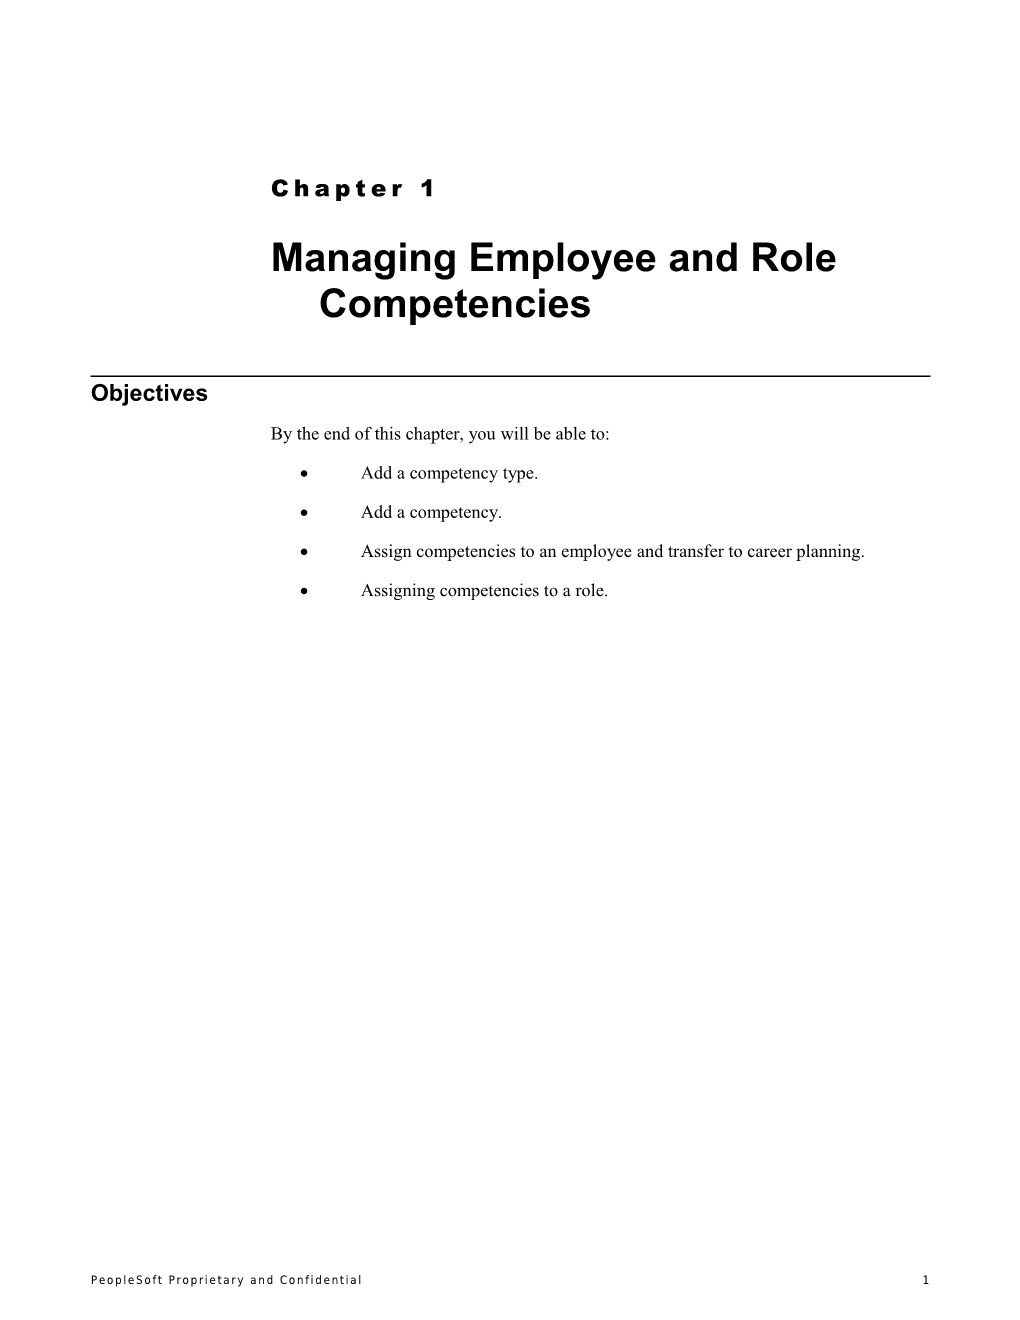 Chapter 3Managing Employee and Role Competencies